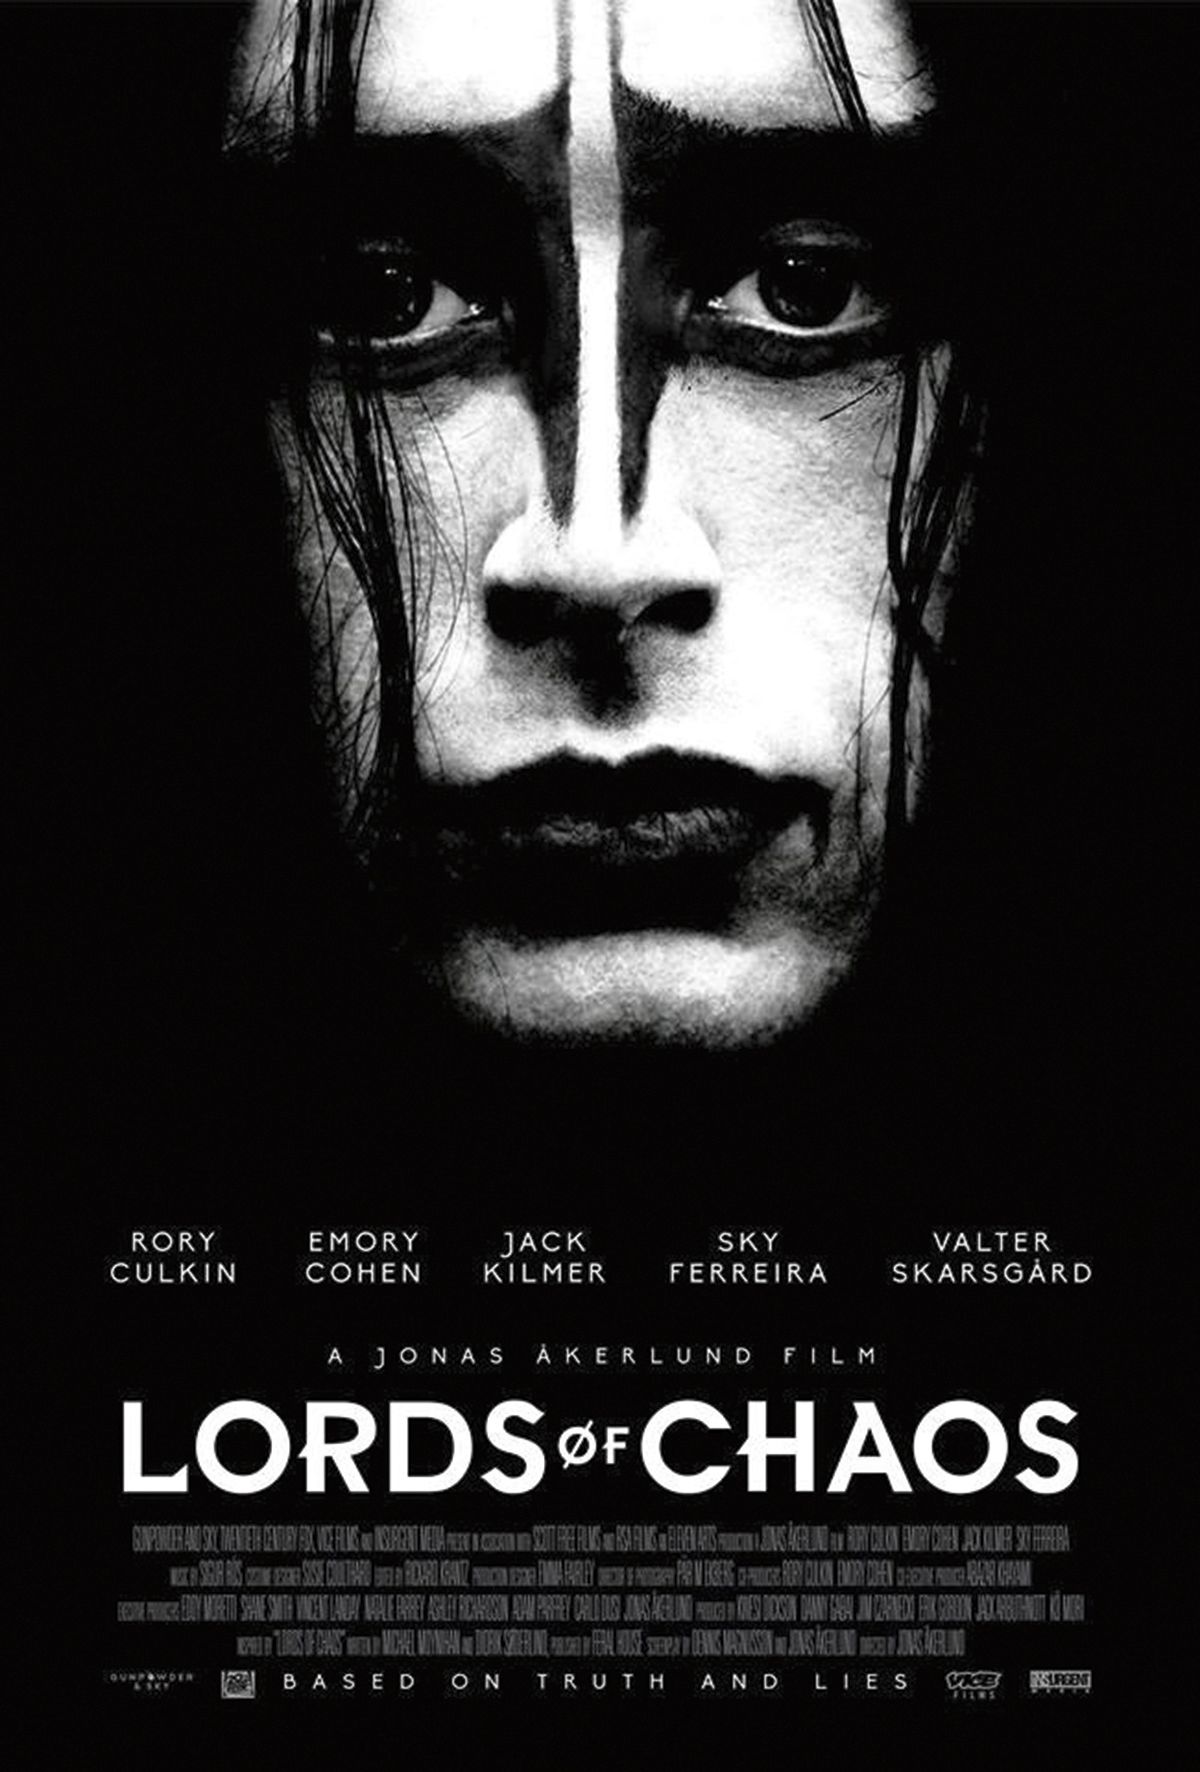 Lords Of Chaos: Blick in den Abgrund